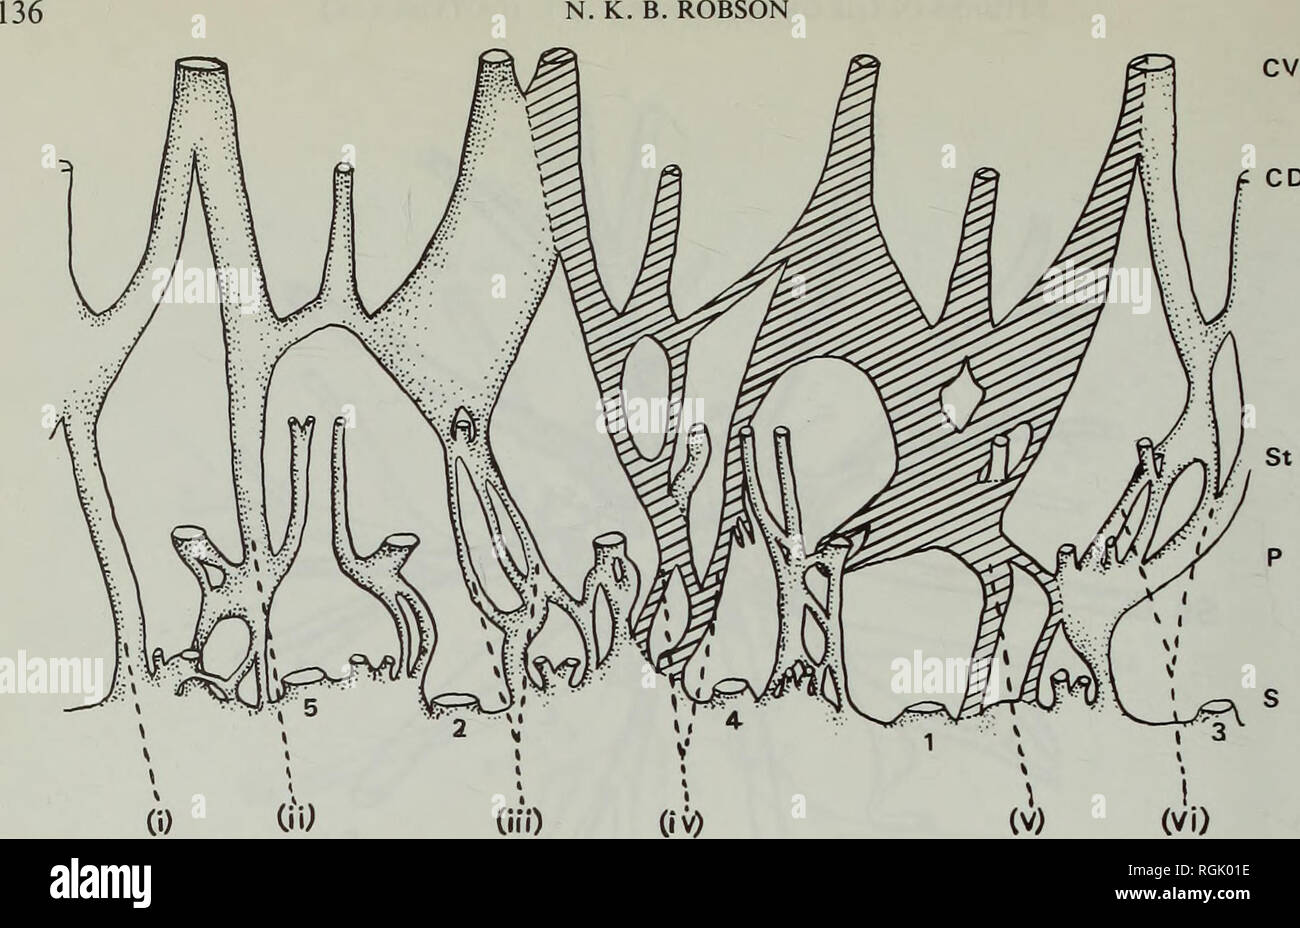 . Bulletin of the British Museum (Natural History) Botany. N. K. B. ROBSON. Fig. 40 Plan of toral vasculature of a 4-carpellary flower of H. natalense (sect. 26), showing that the trace to carpel 4 is derived from that of carpel 1 of a 3-carpellary gynoecium. organs. In smaller-flowered species (H. pulchrum (Figs 39, 47e) and H. aethiopicum subsp. sonderi), the vascular plan is essentially similar but simpler, as it is in the species with fasciclodes, H. aegypticum and H. elodes (Robson, 1972a : figs 8,9). (e) Sect. Humifusoideum Saunders (1937) investigated Hypericum peplidifolium because it  Stock Photo